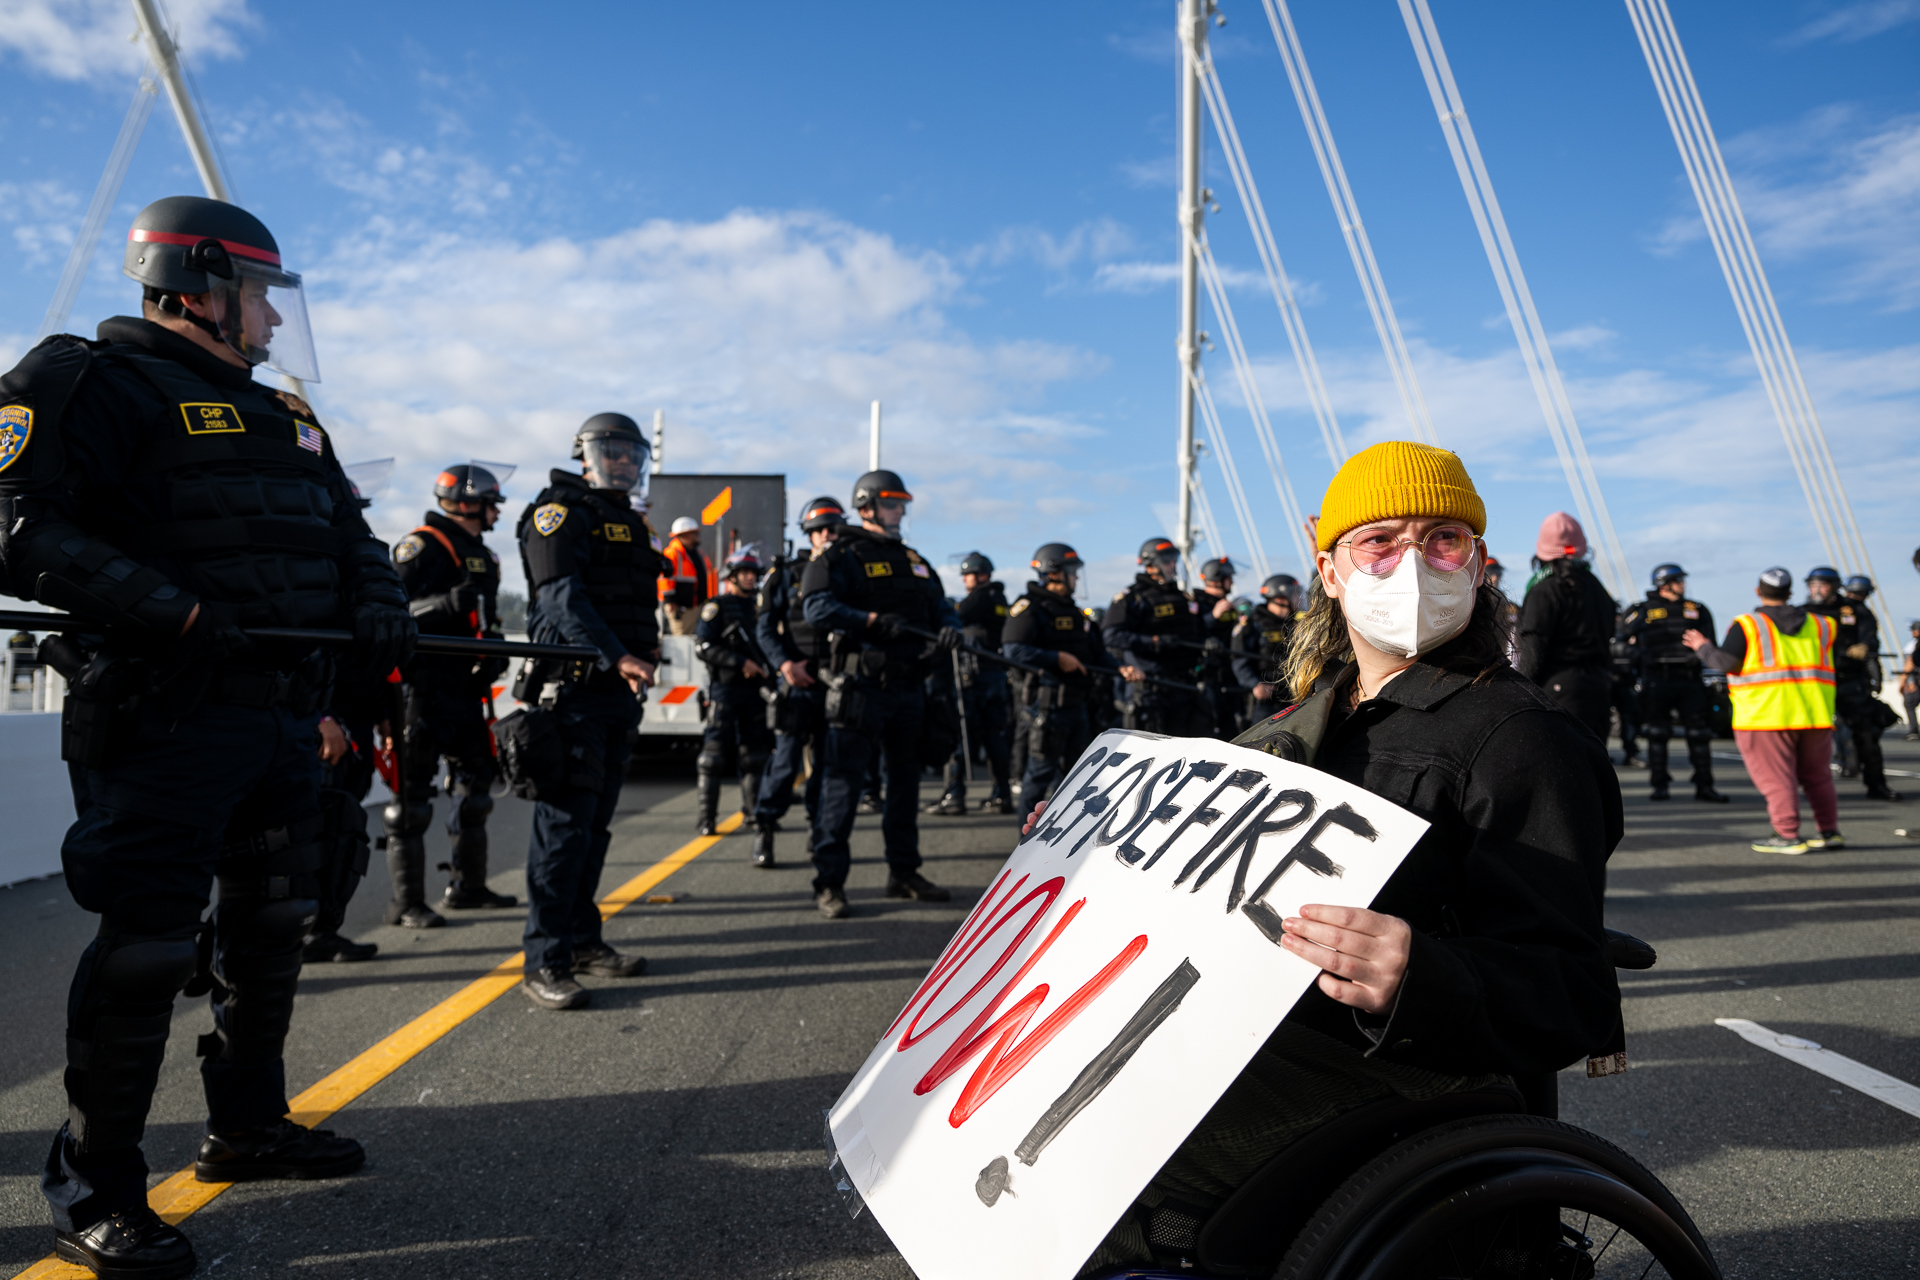 A person in a wheelchair holds a protest sign with a line of police on the left and behind them.